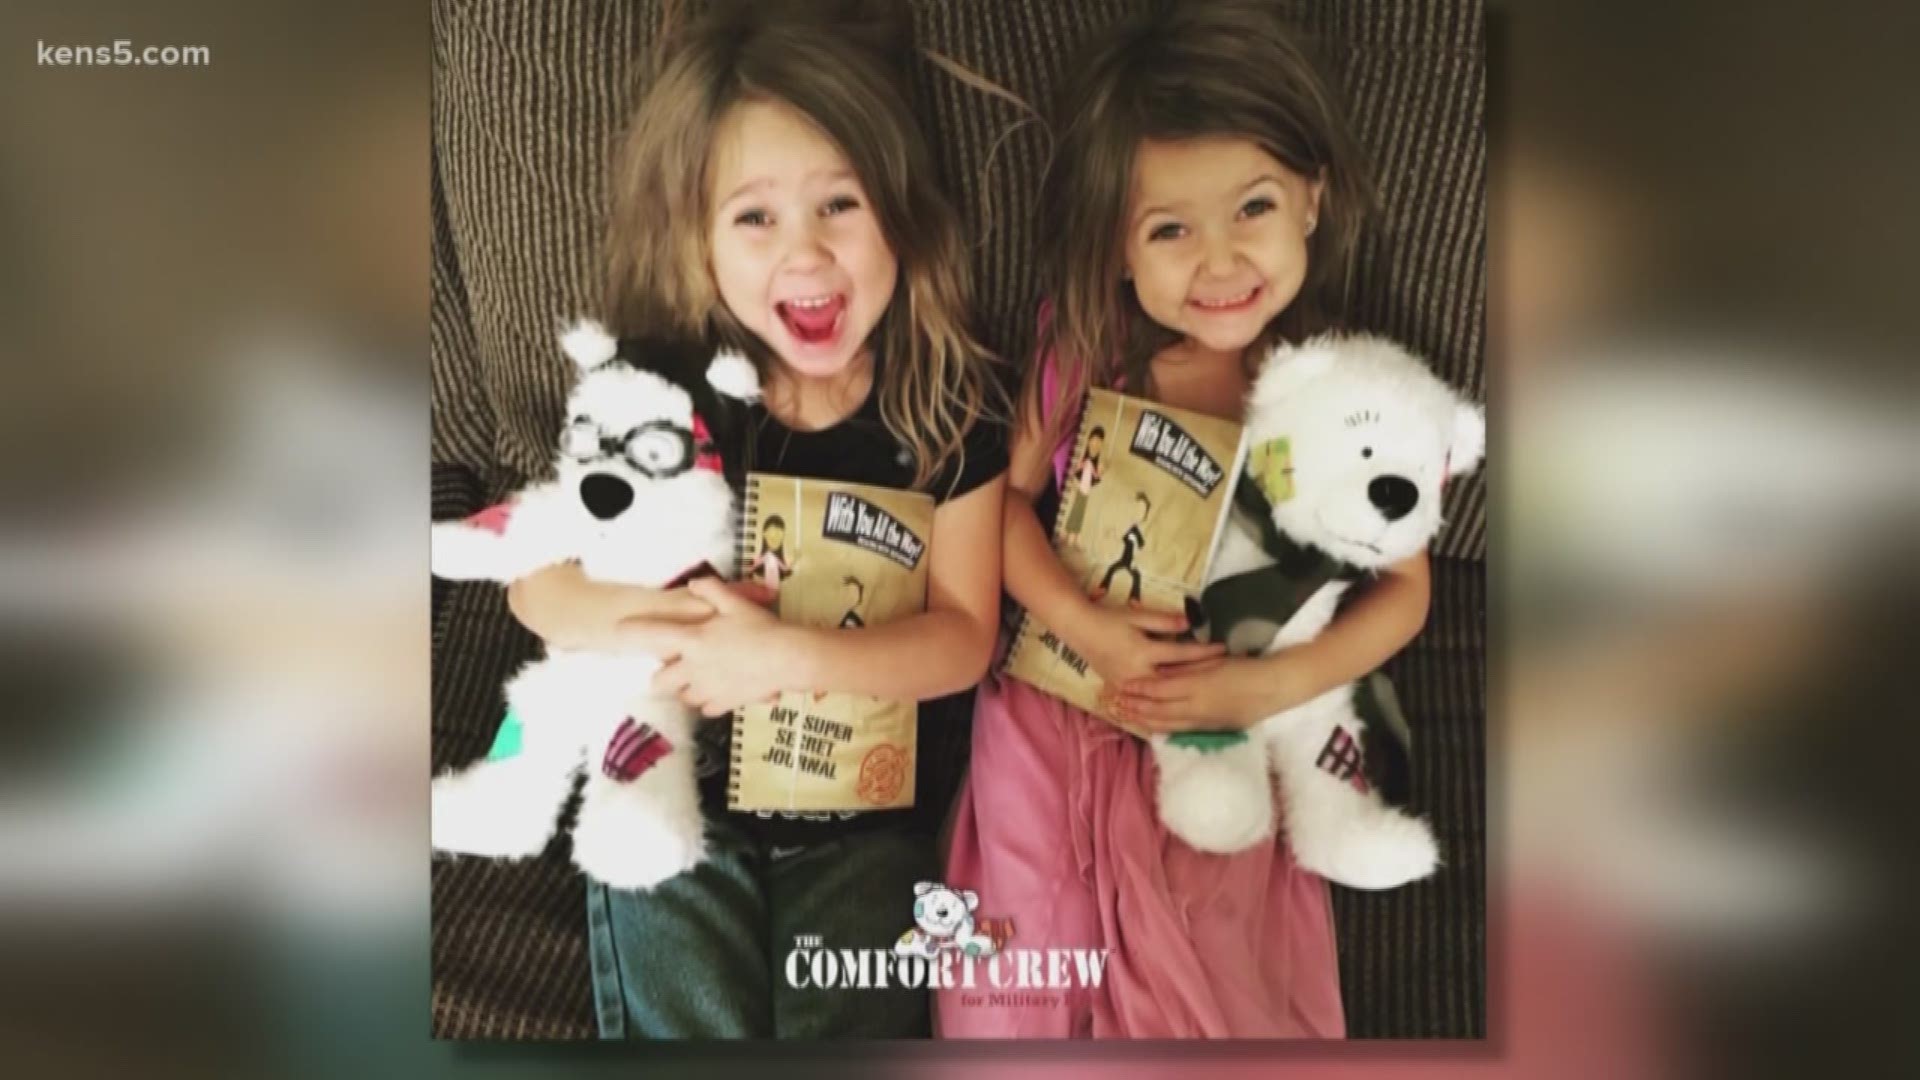 Being a part of a military family can be tough, especially for kids. That's where the Comfort Crew for military children comes in.